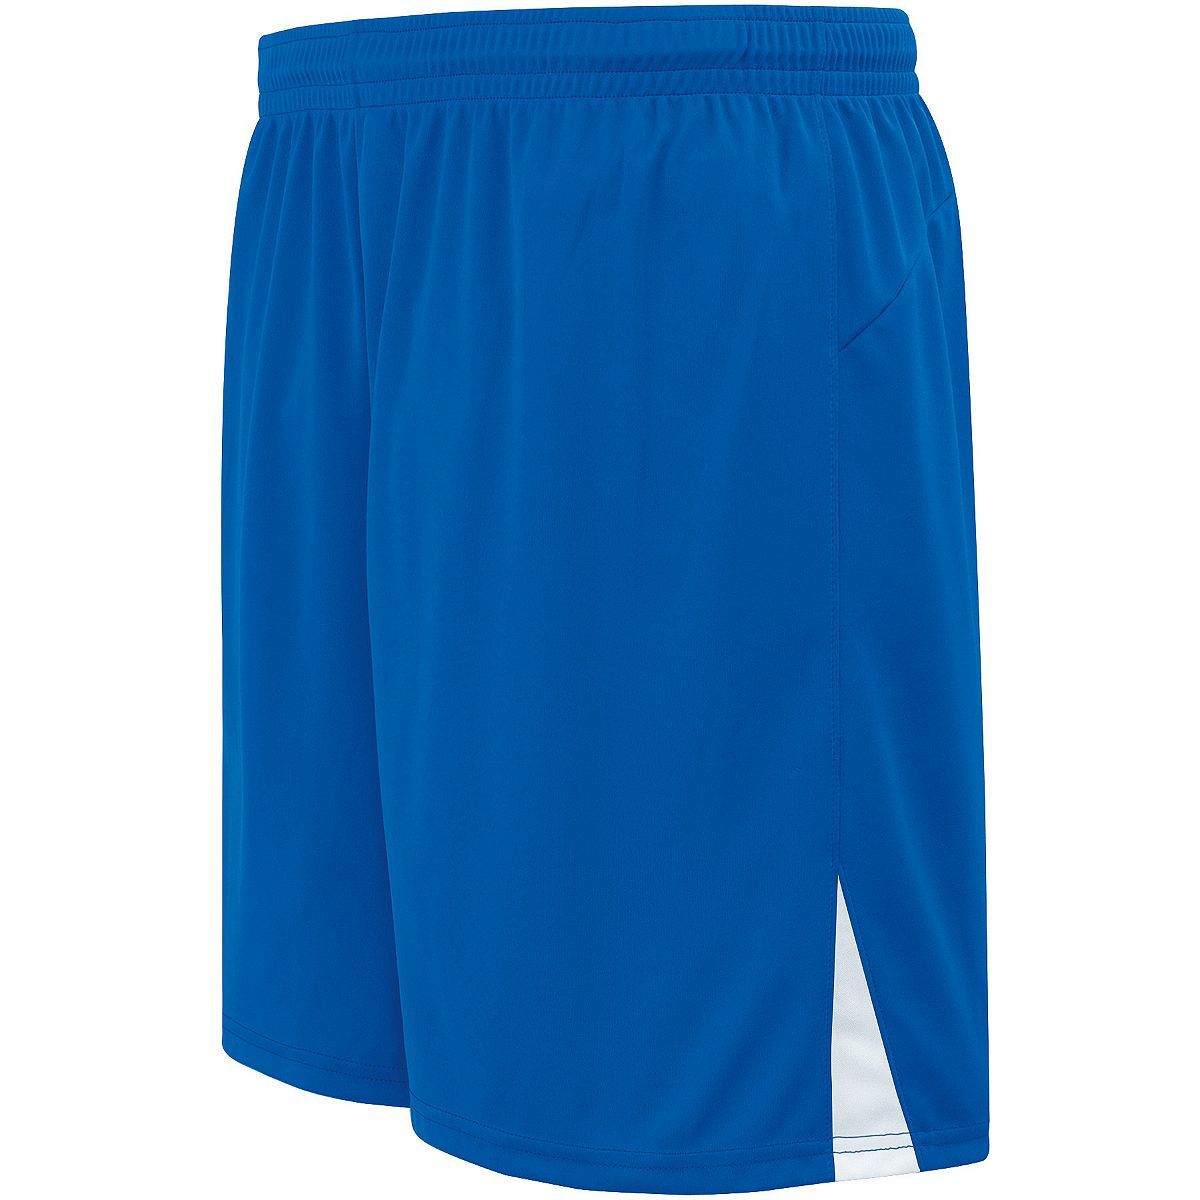 High 5 Hawk Shorts in Royal/White  -Part of the Adult, Adult-Shorts, High5-Products, Soccer, All-Sports-1 product lines at KanaleyCreations.com